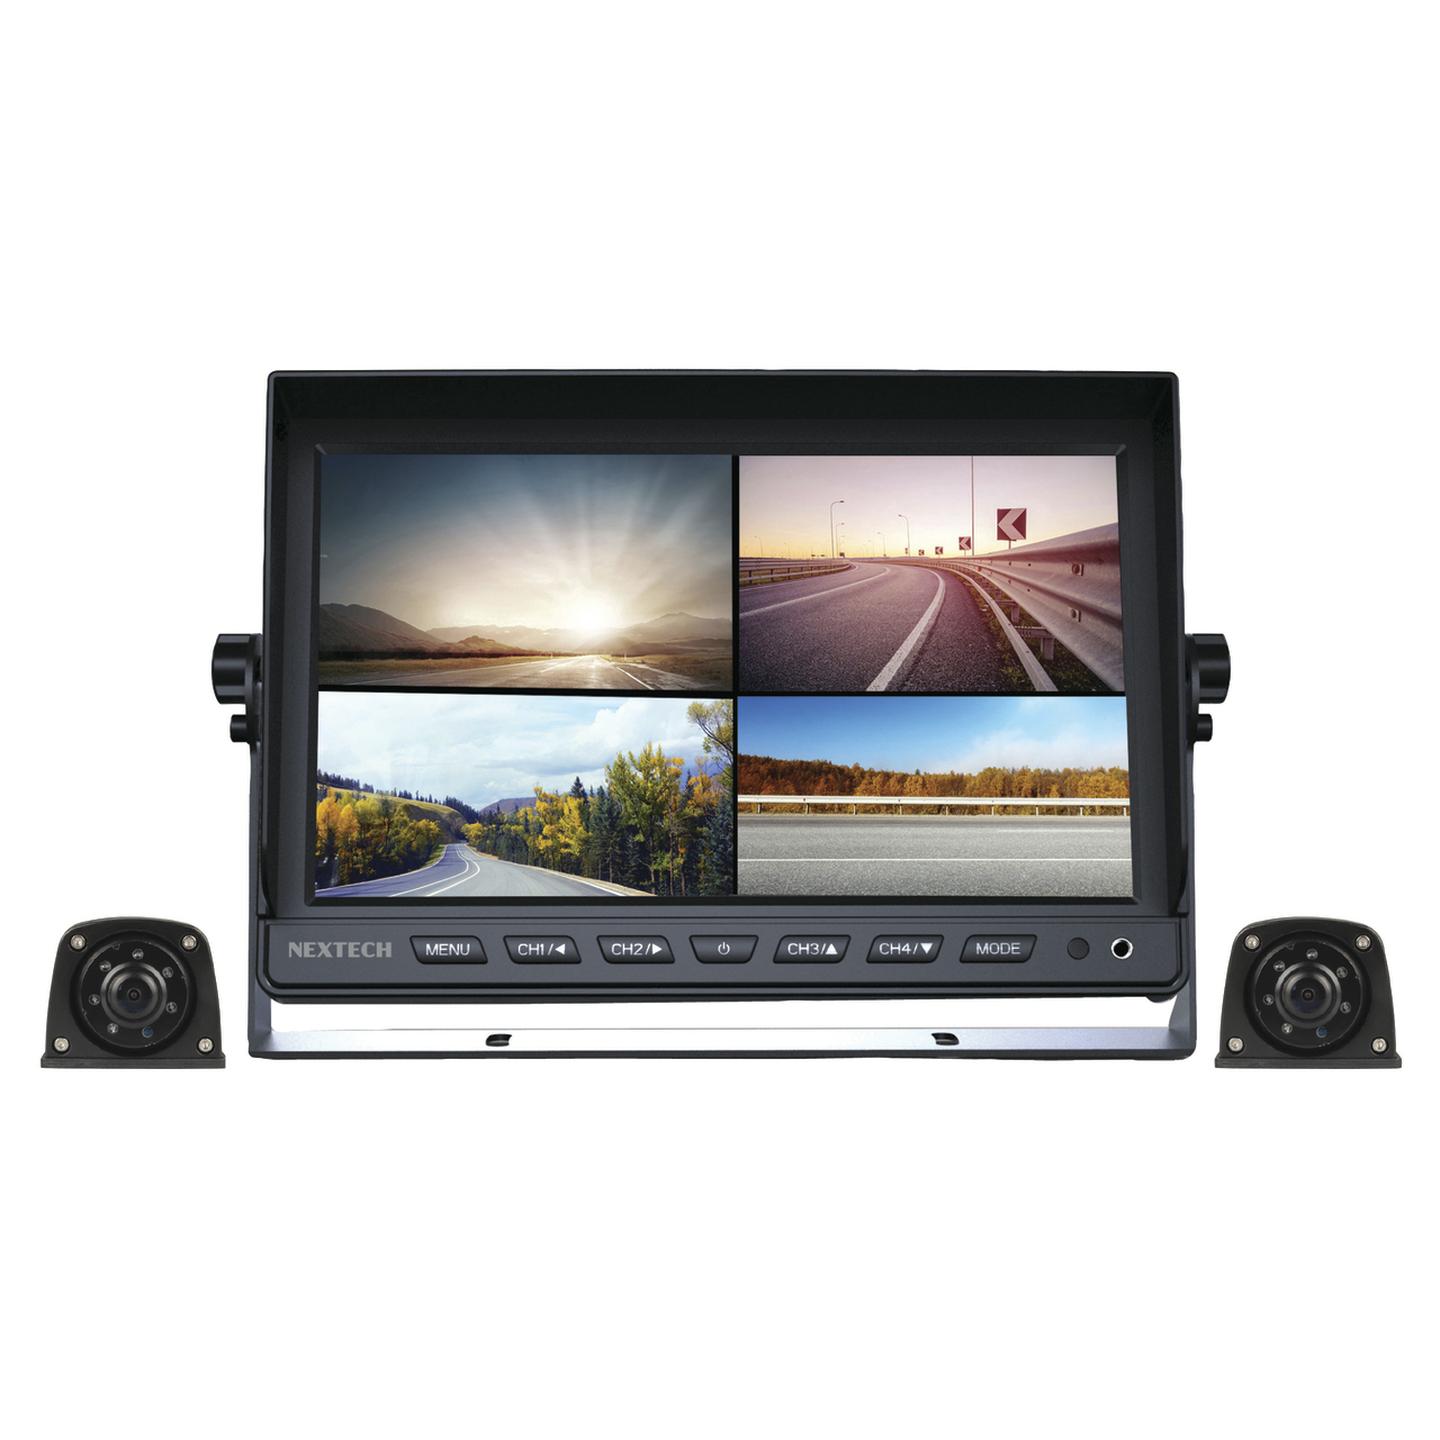 7 Inch 1080p LCD Monitor Kit with Built-In 4CH AHD Vehicle DVR and 2 x Wedge Style Vehicle Cameras